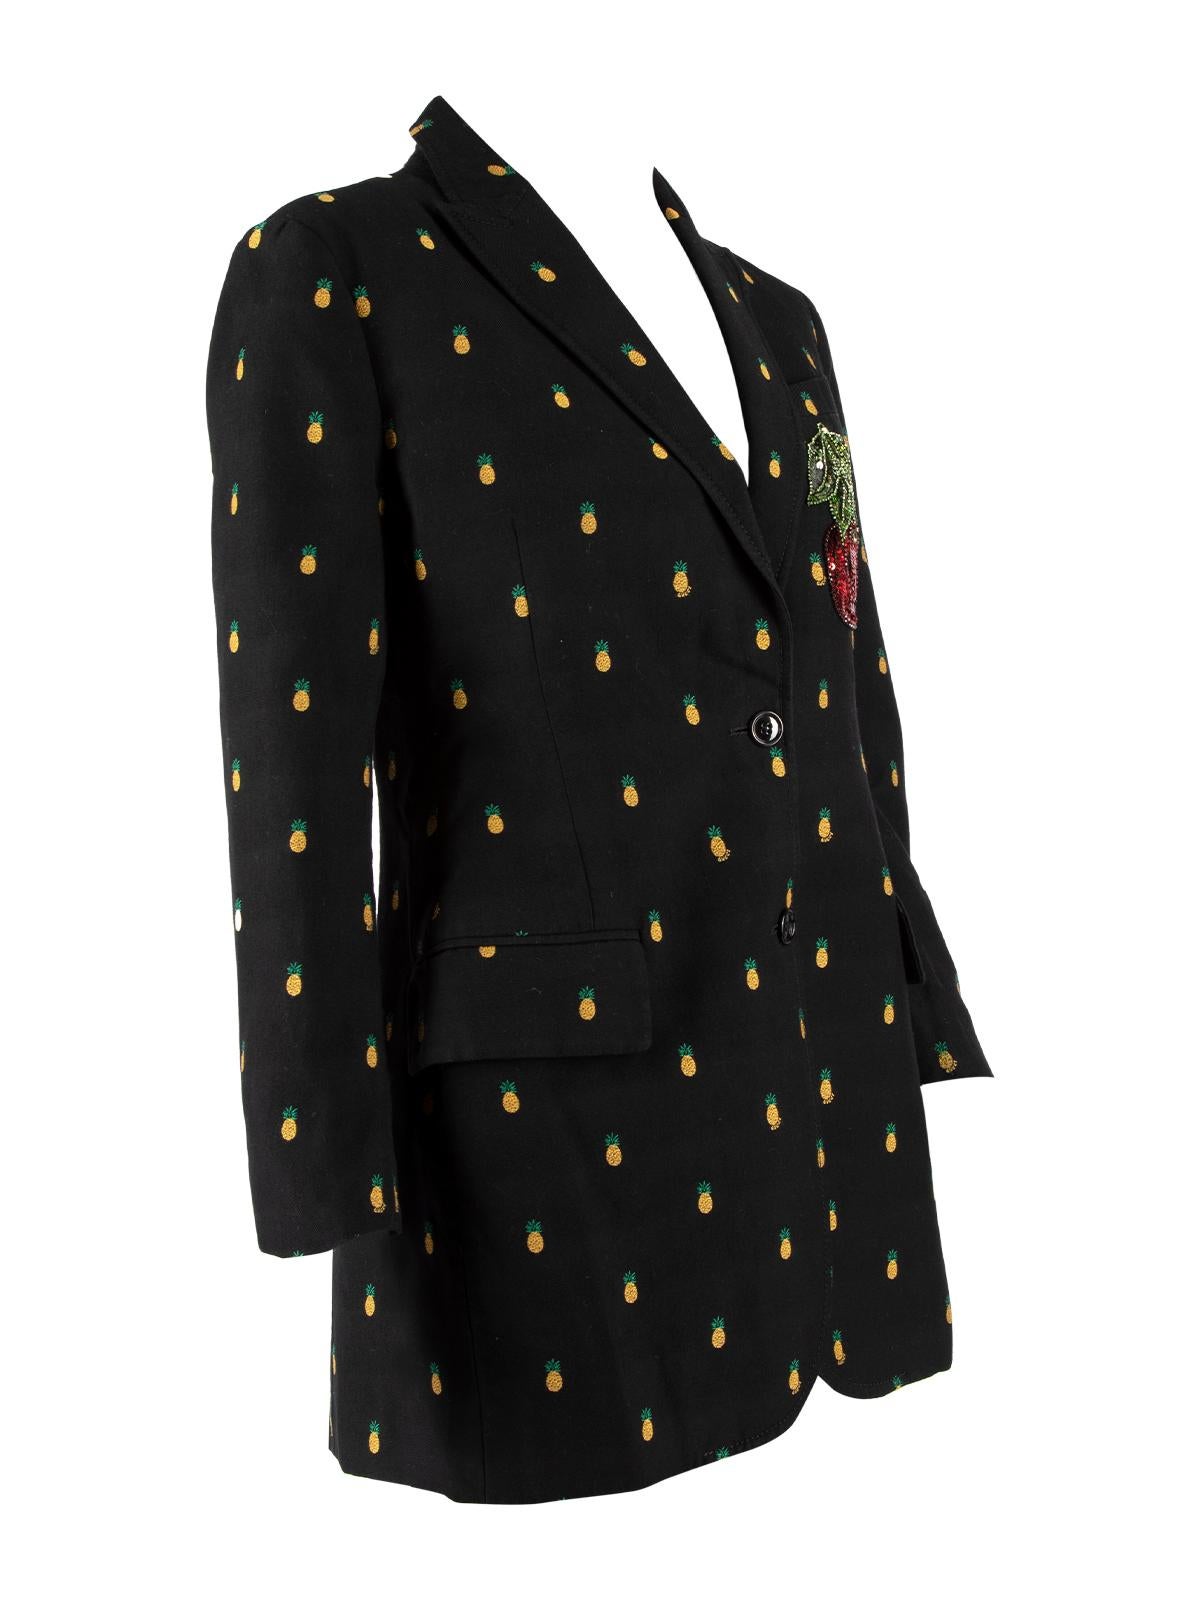 CONDITION is Very good. Hardly any visible wear to blazer is evident on this used Gucci designer resale item. Details Black Cotton and wool Blazer Form fitting Long sleeve V neck Embroidered pattern 2x exterior pockets Single breasted Front button